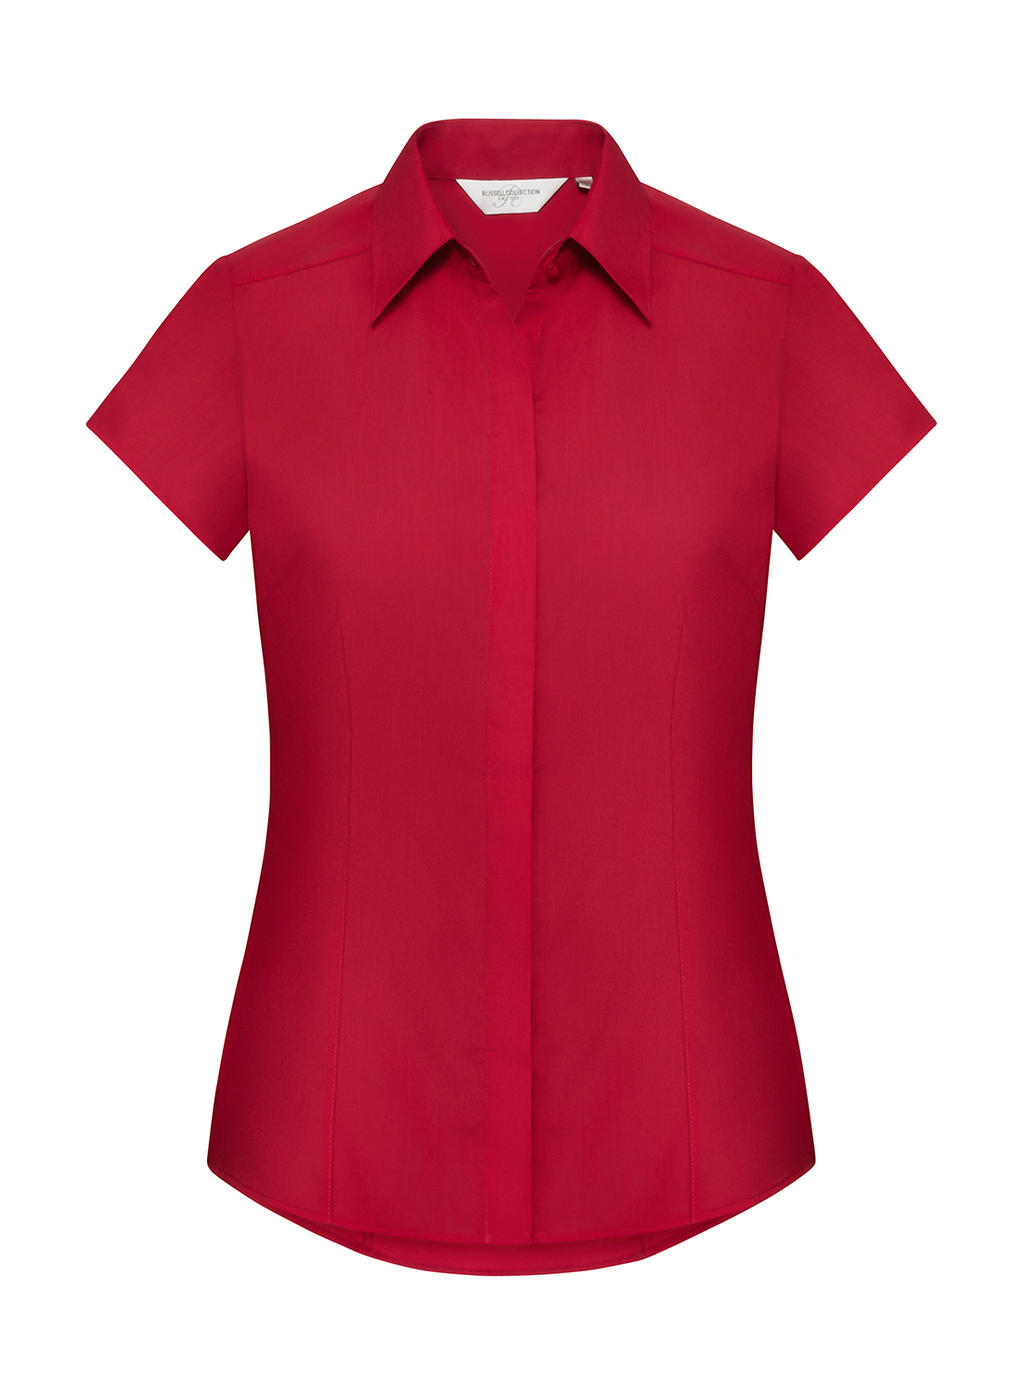  Ladies Fitted Poplin Shirt in Farbe Classic Red